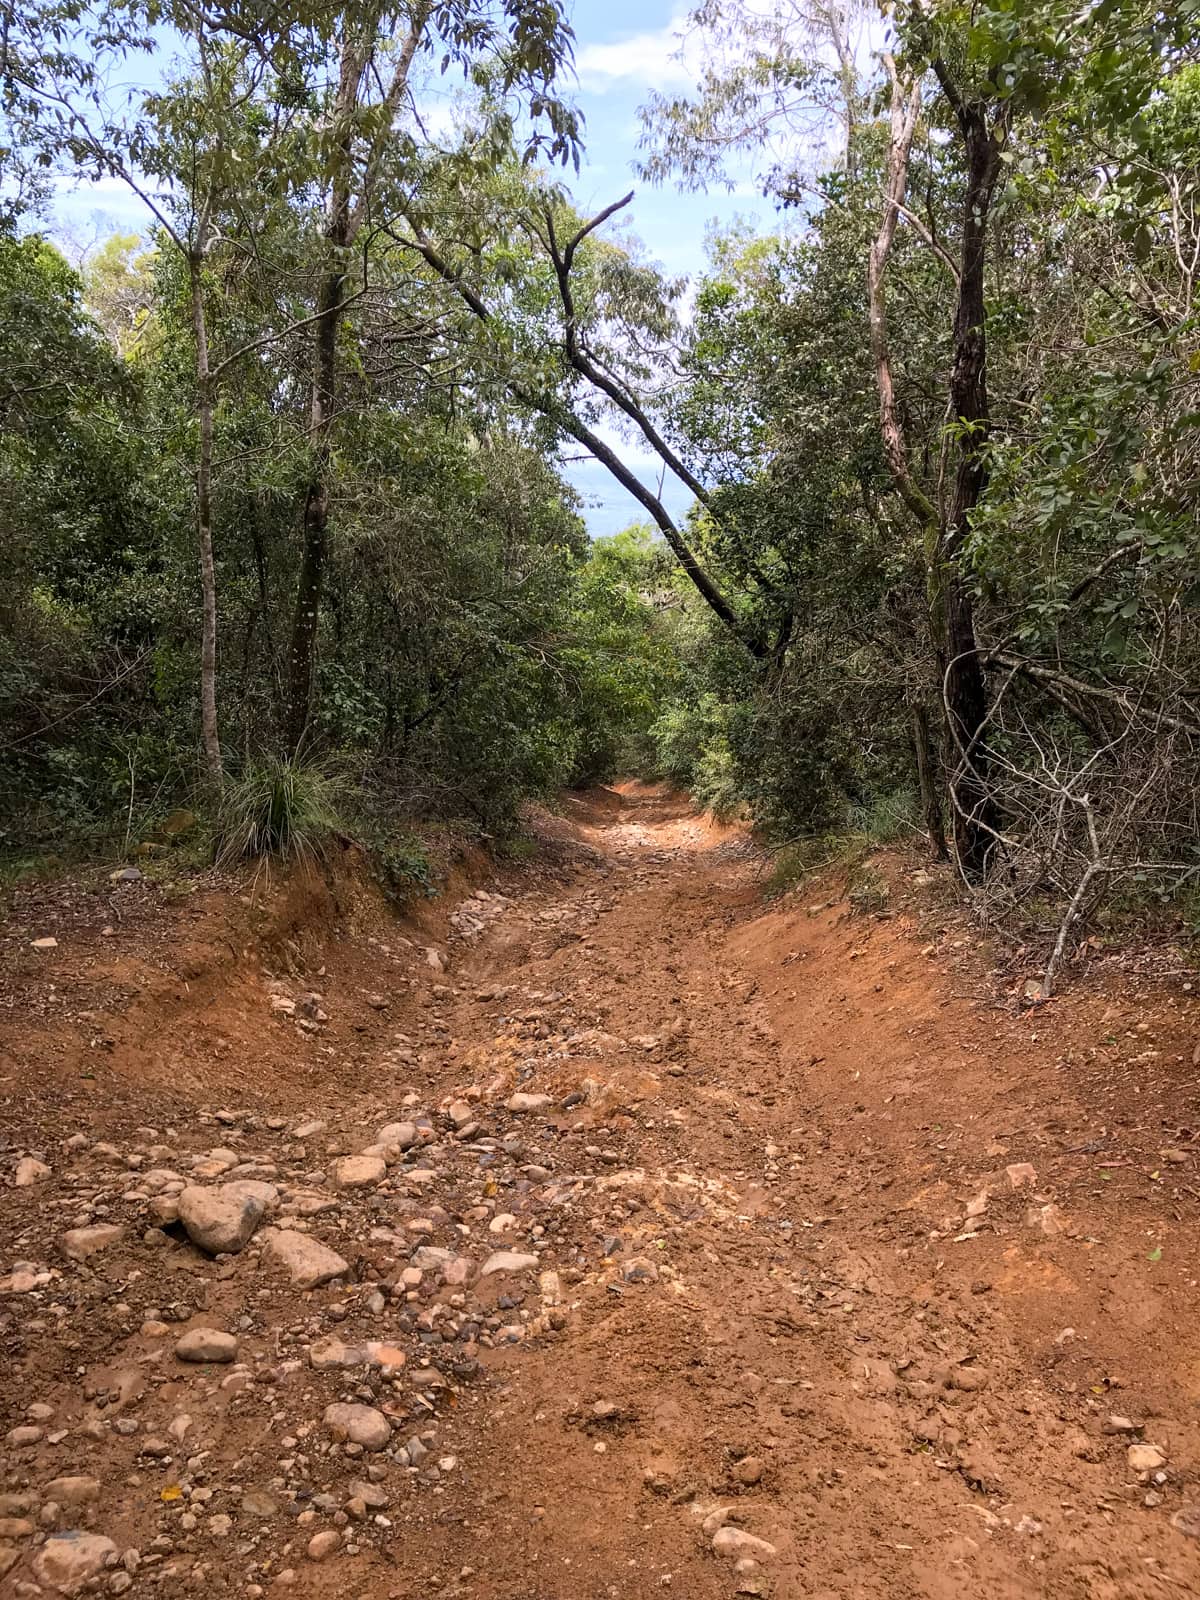 An earth-coloured, deep dirt track leading into the distance. The track has many rocks and is uneven. Bush-like trees line the edges of the track.